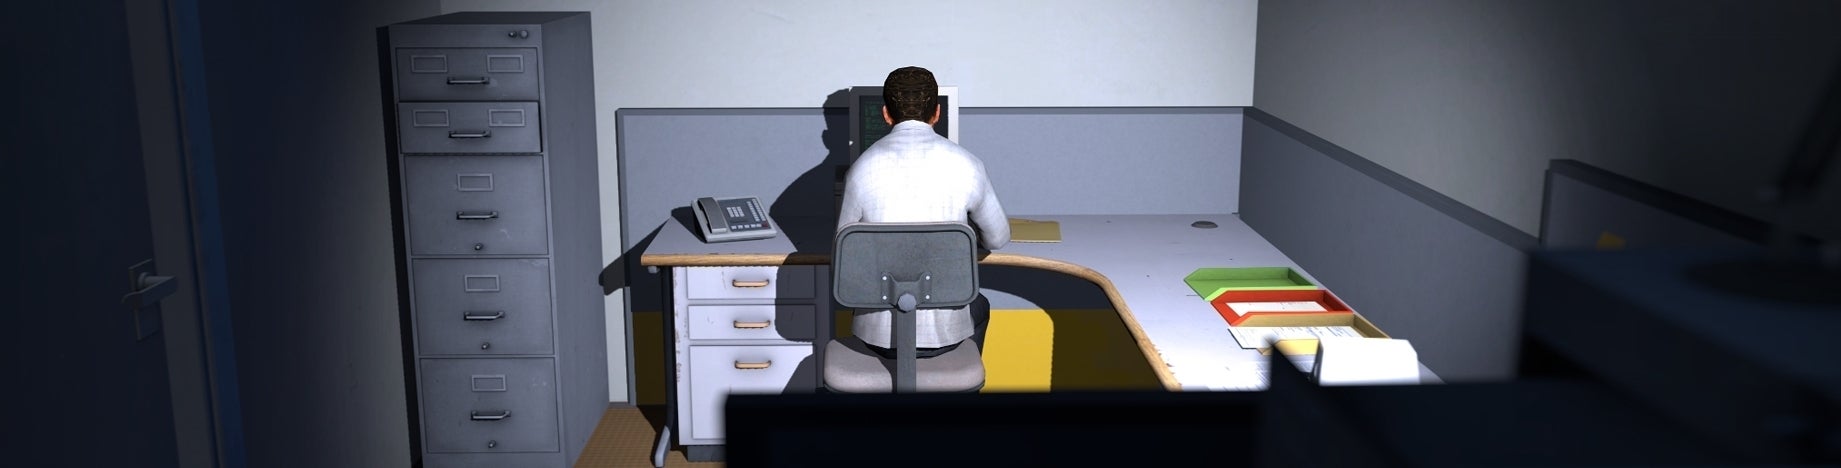 Image for Games of 2013: The Stanley Parable